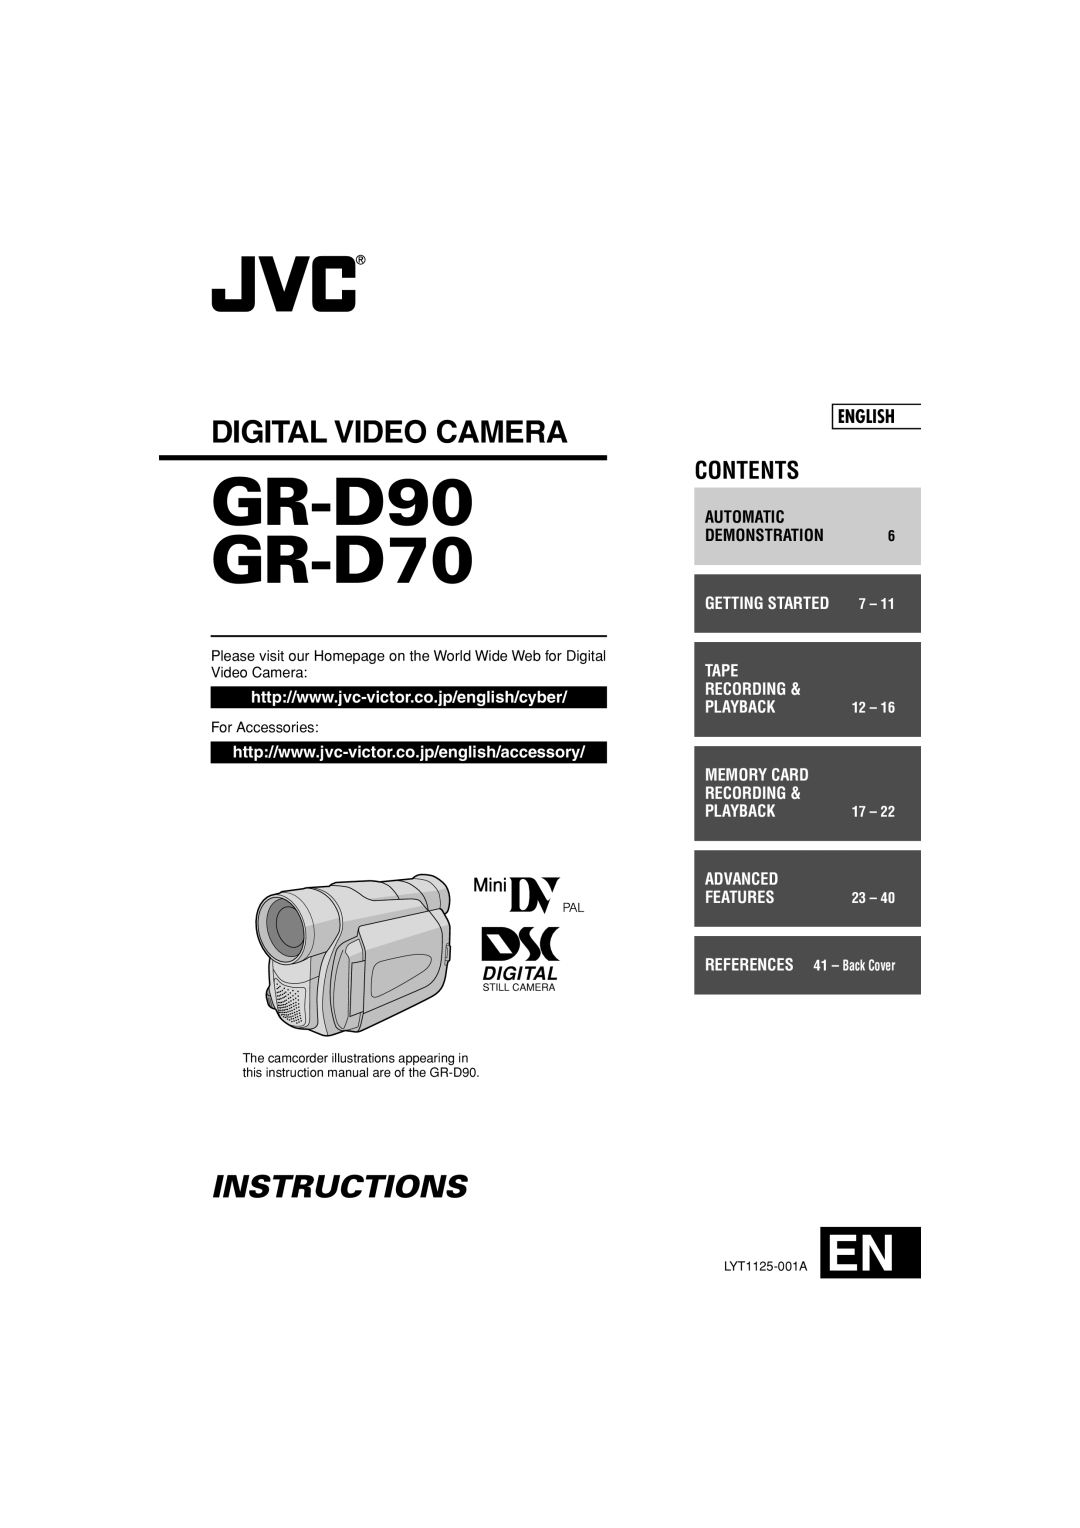 JVC GR-D90 GR-D70 instruction manual English, Automatic, Tape, Recording, Playback, Memory Card, Advanced, Features 